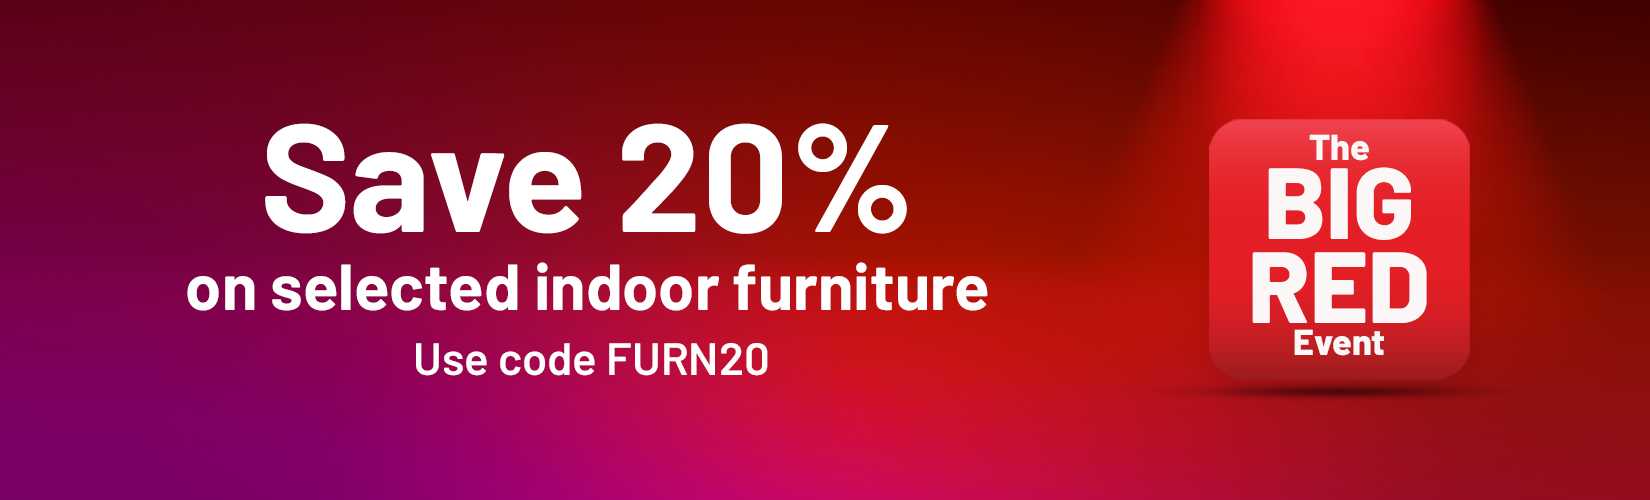 Save 20% on selected indoor furniture. Use code FURN20.